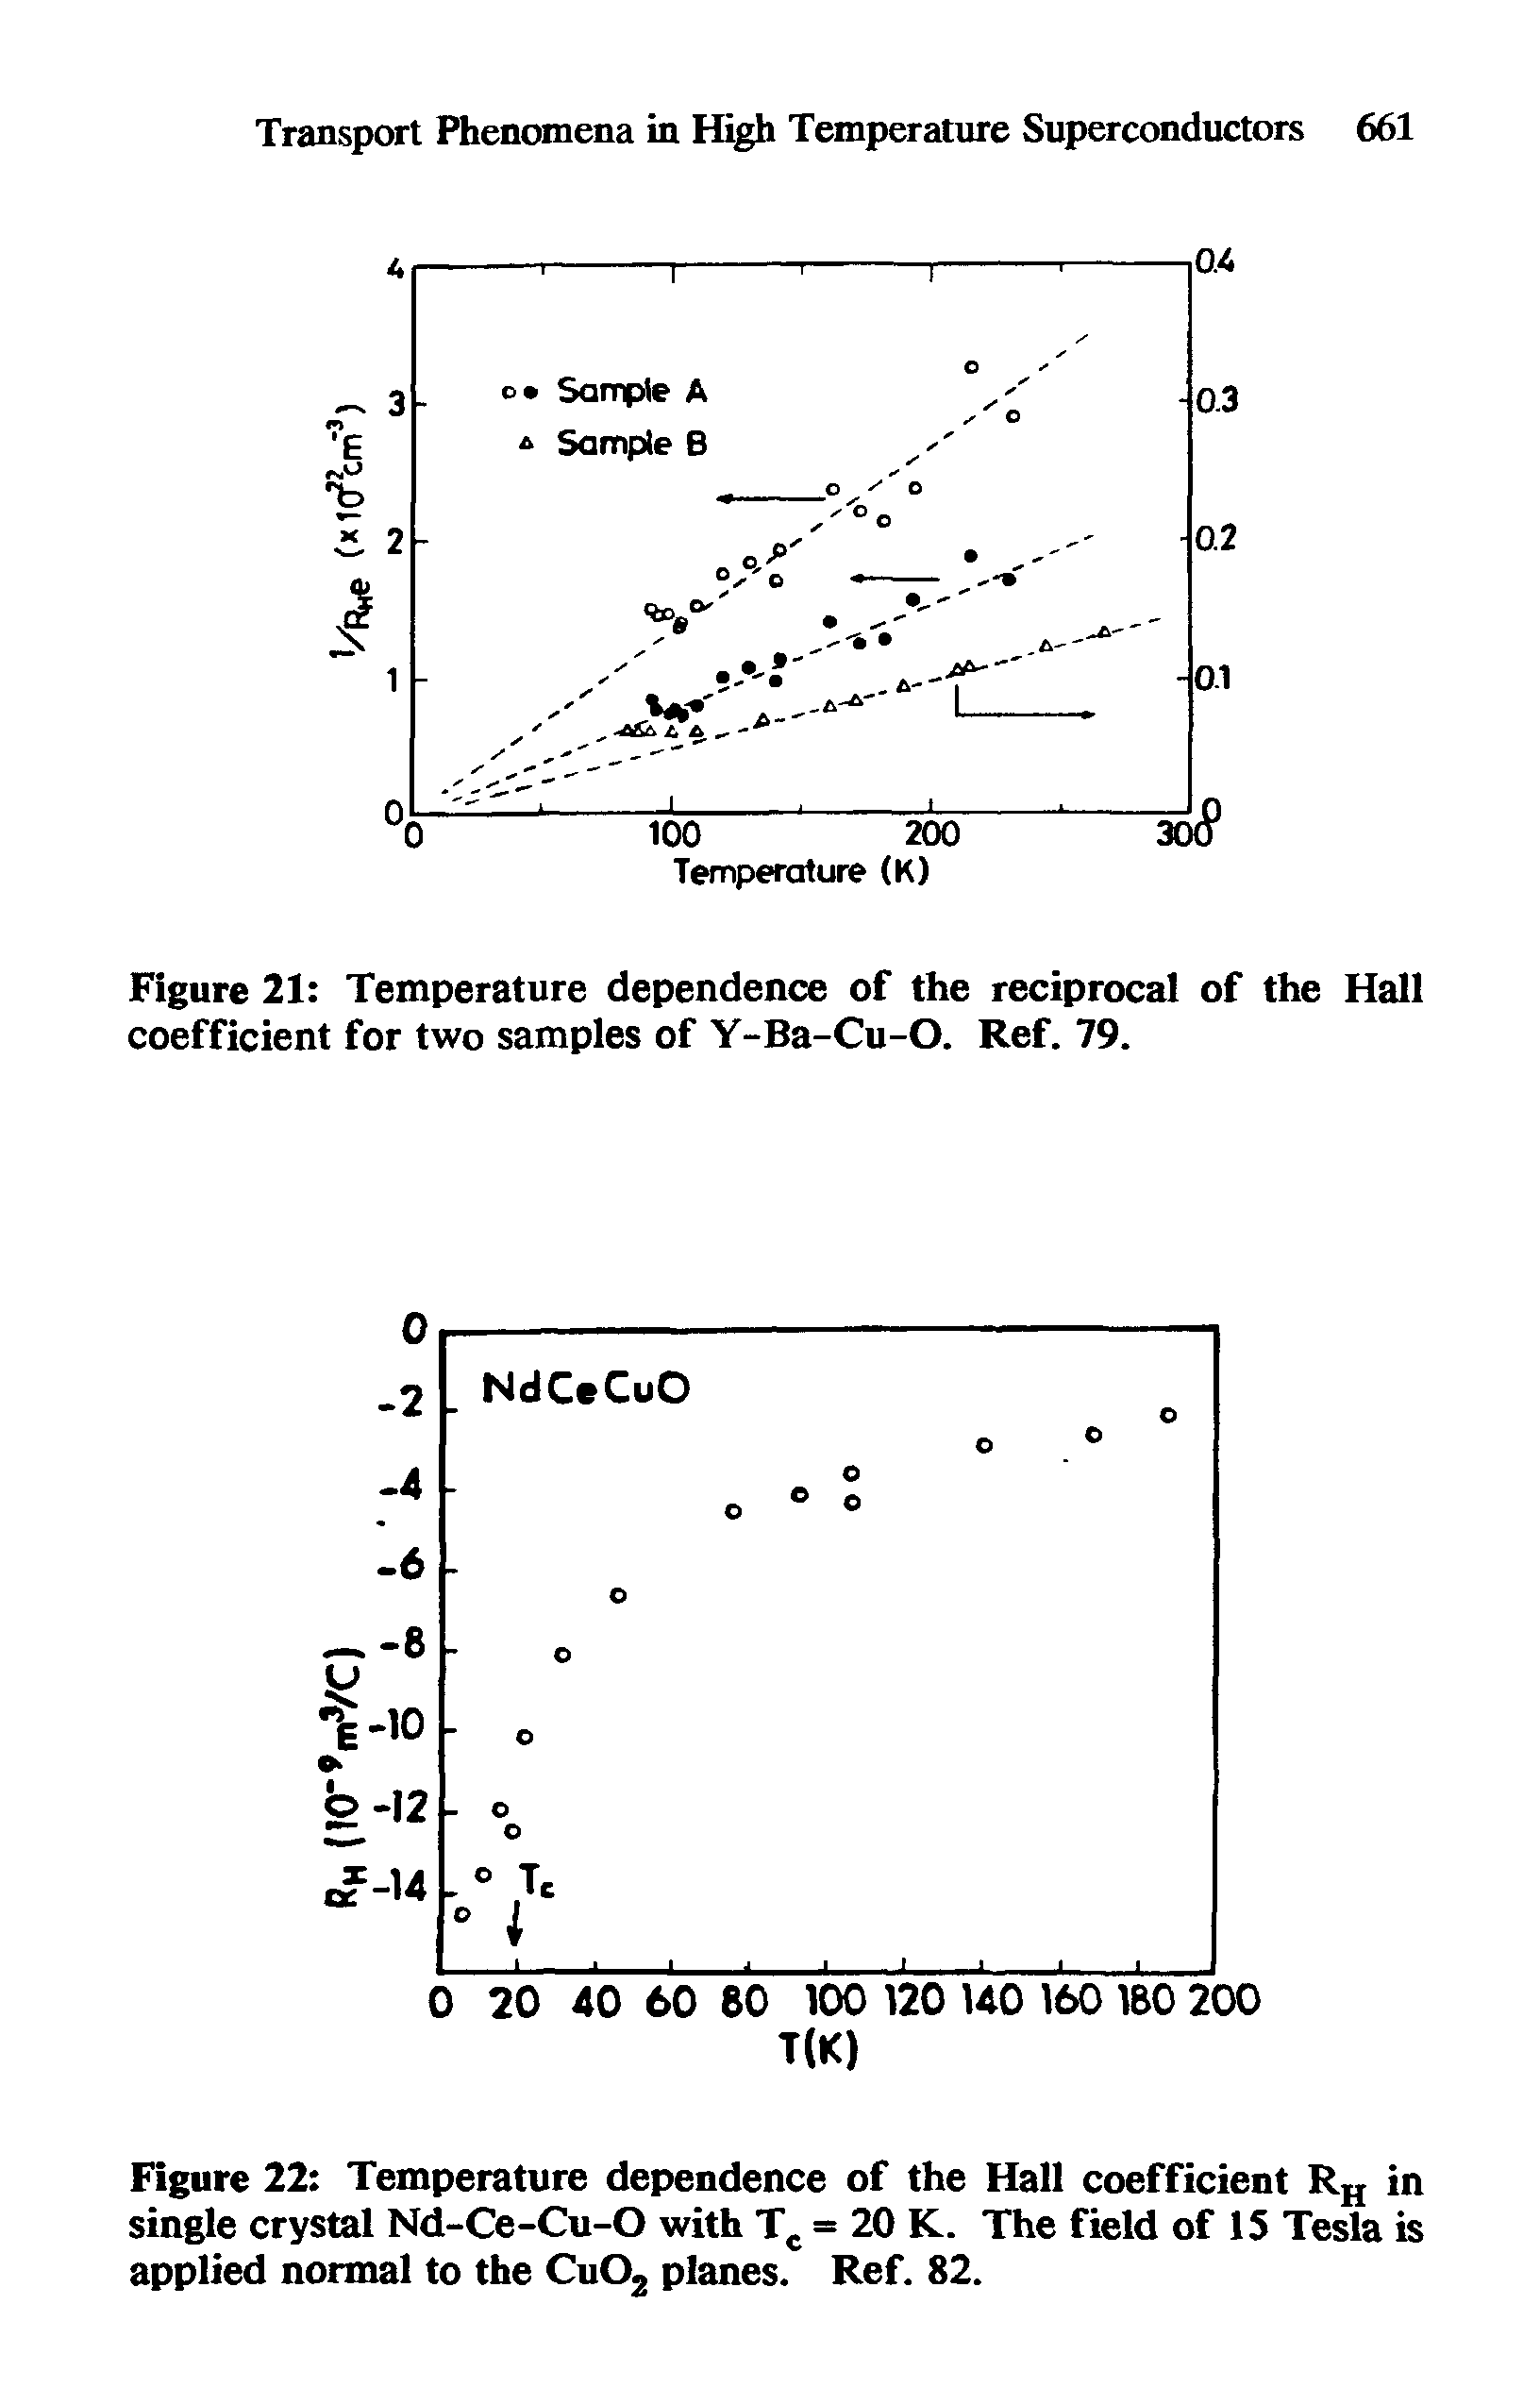 Figure 22 Temperature dependence of the Hall coefficient RH in single crystal Nd-Ce-Cu-O with Tc = 20 K. The field of 15 Tesla is applied normal to the Cu02 planes. Ref. 82.